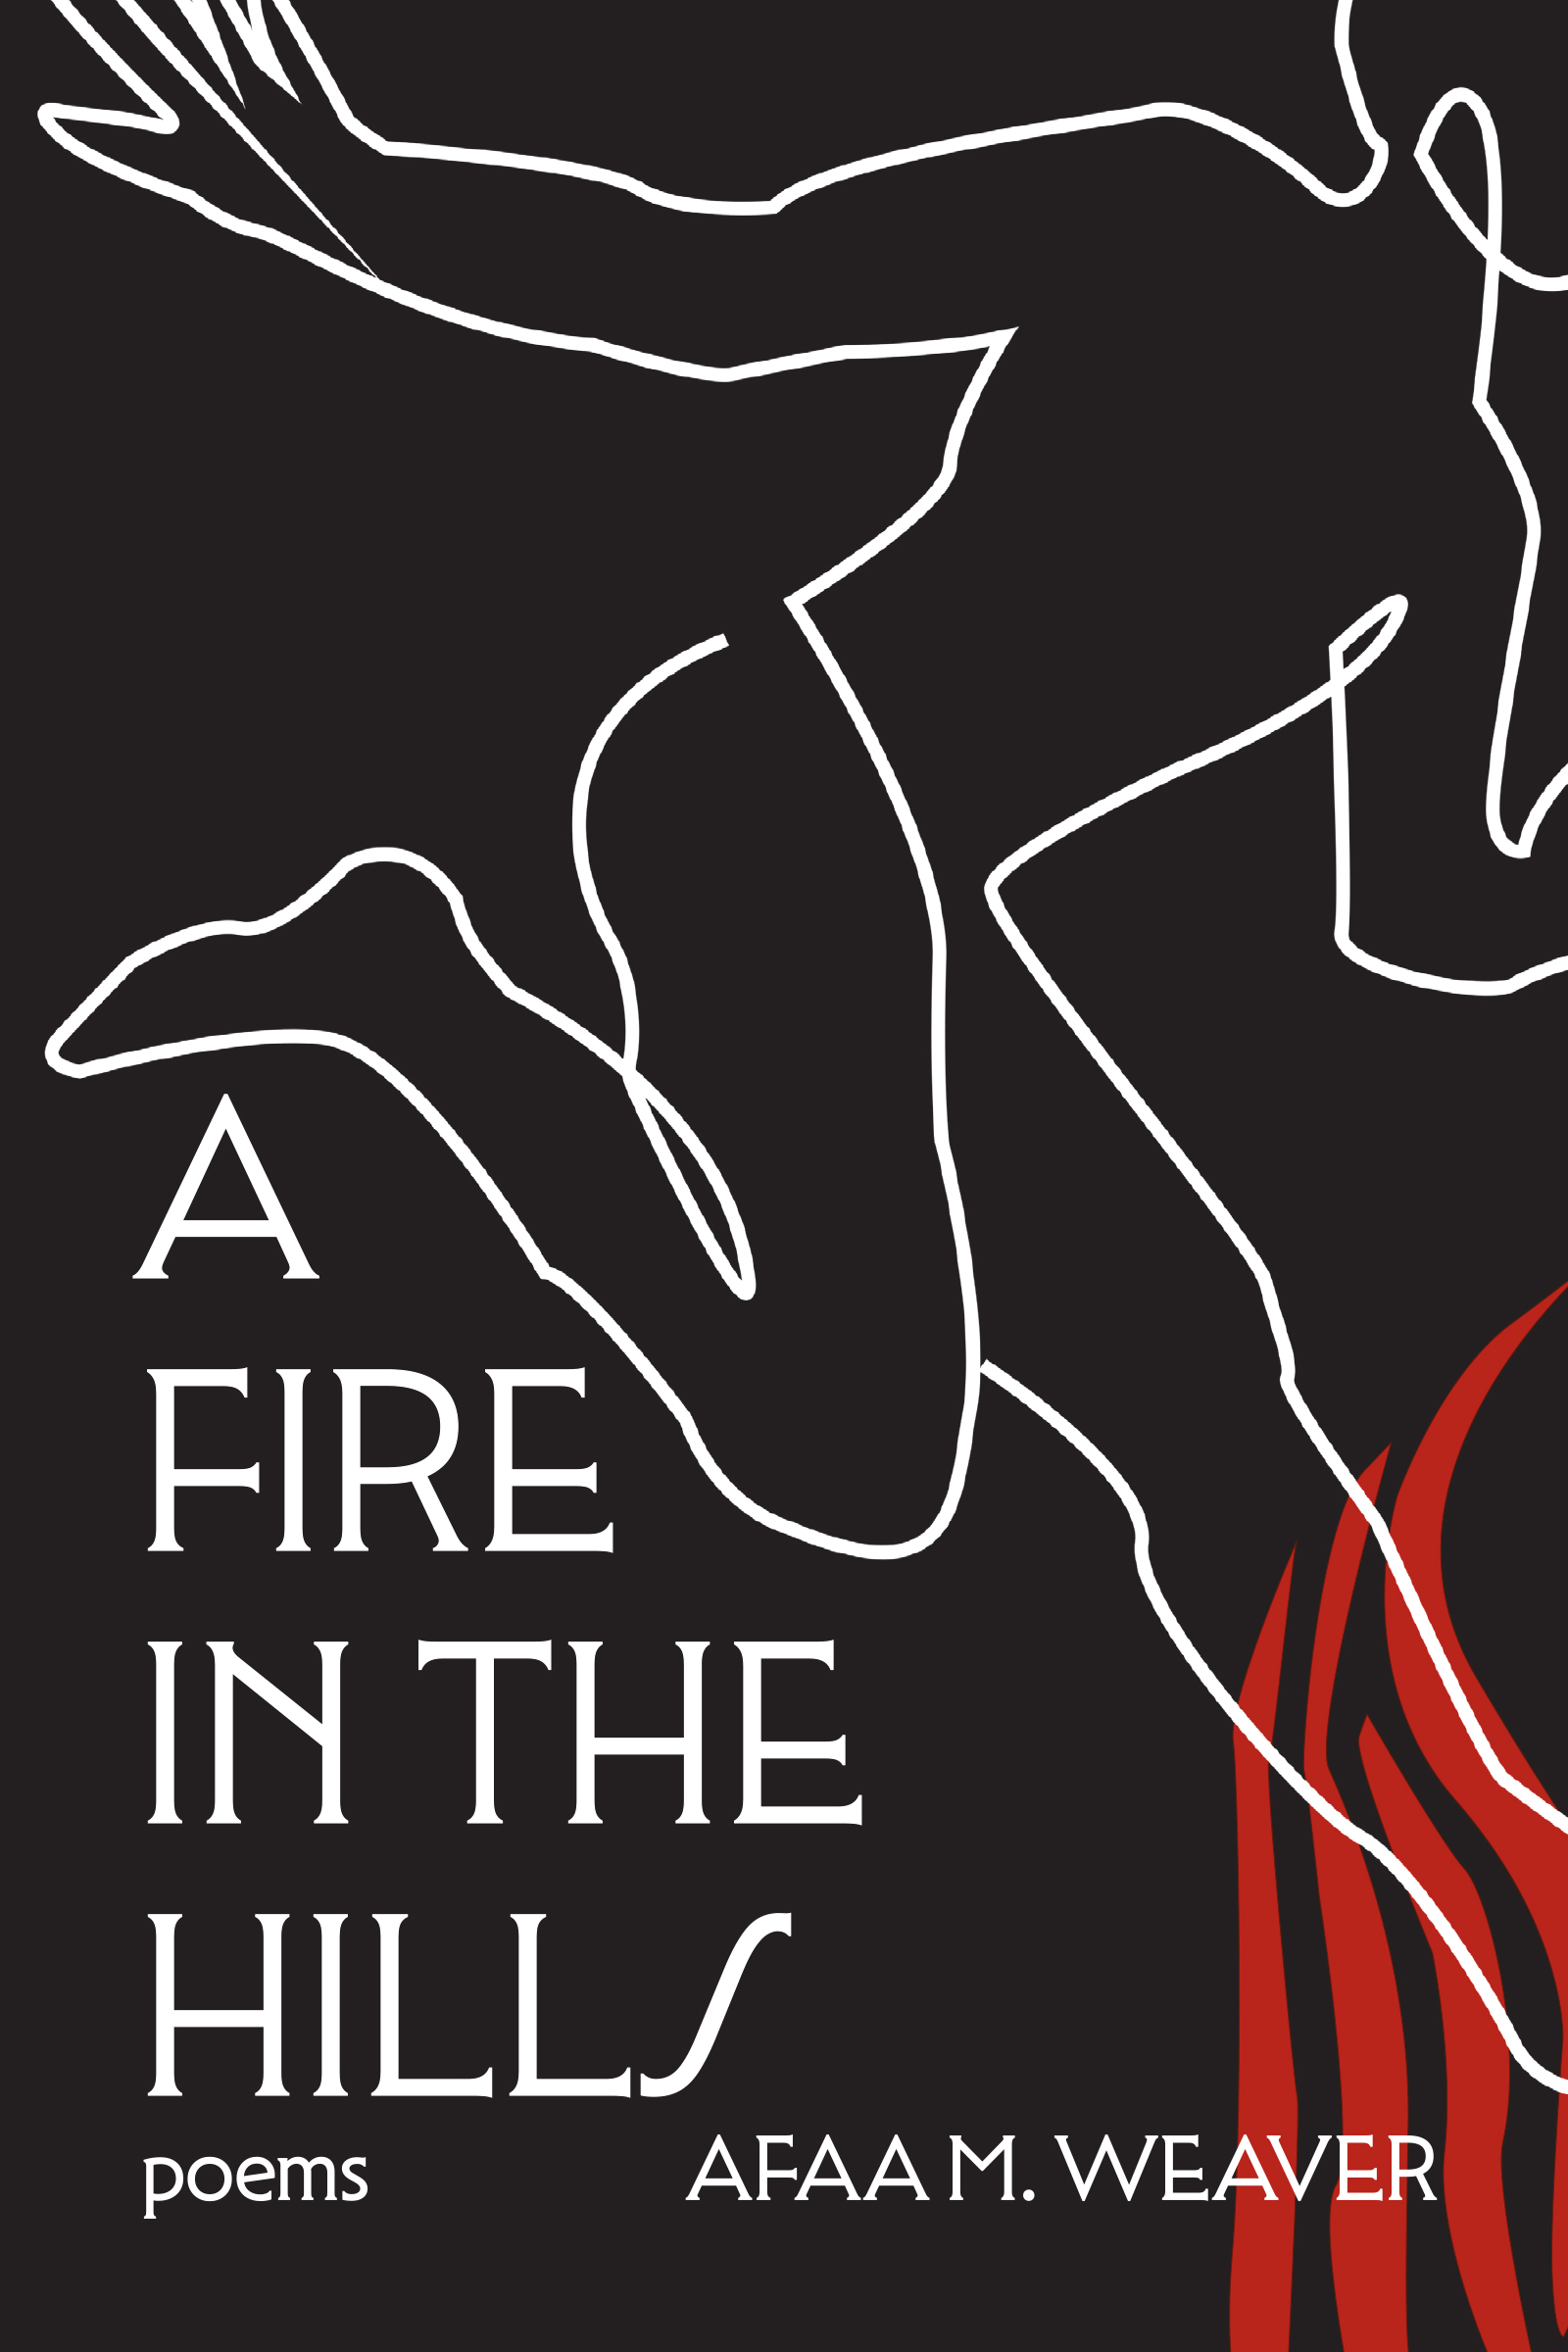 On a black cover, a white silhouetted person steps into a flaming fire above the words A Fire In the Hills poems by Afaa M. Weaver